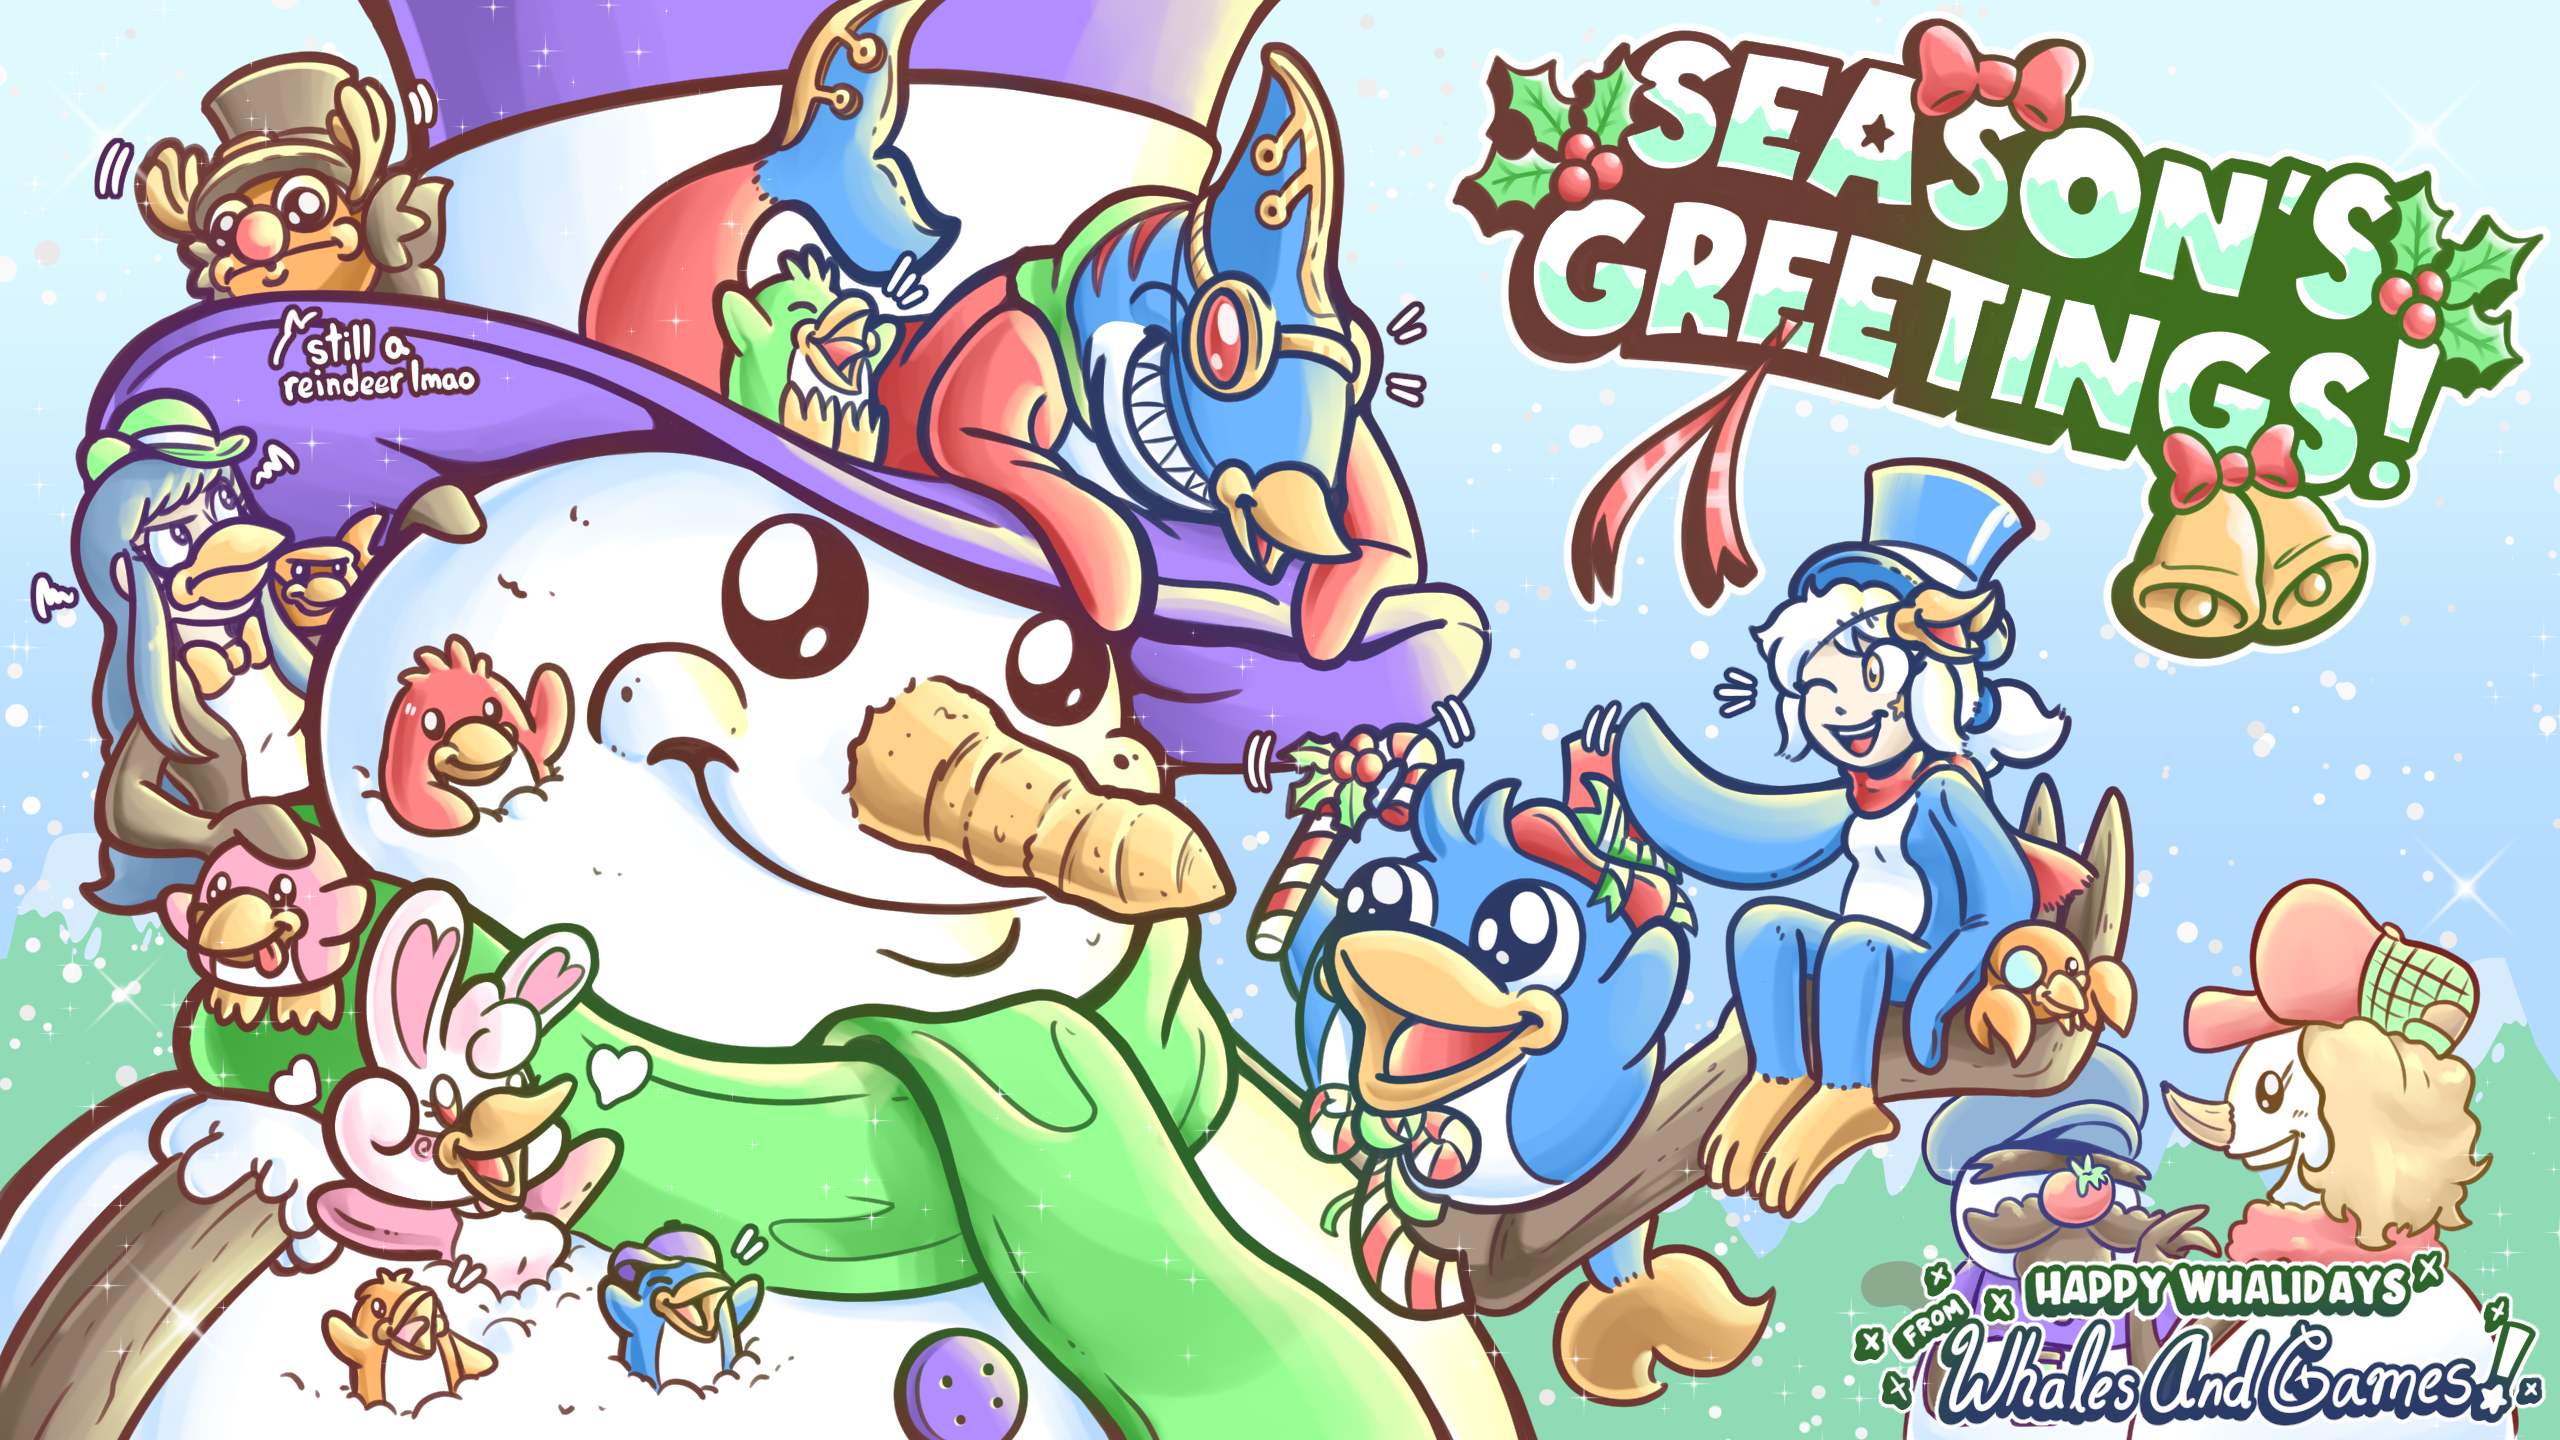 Season's Greetings and Happy Whalidays from Whales And Games!